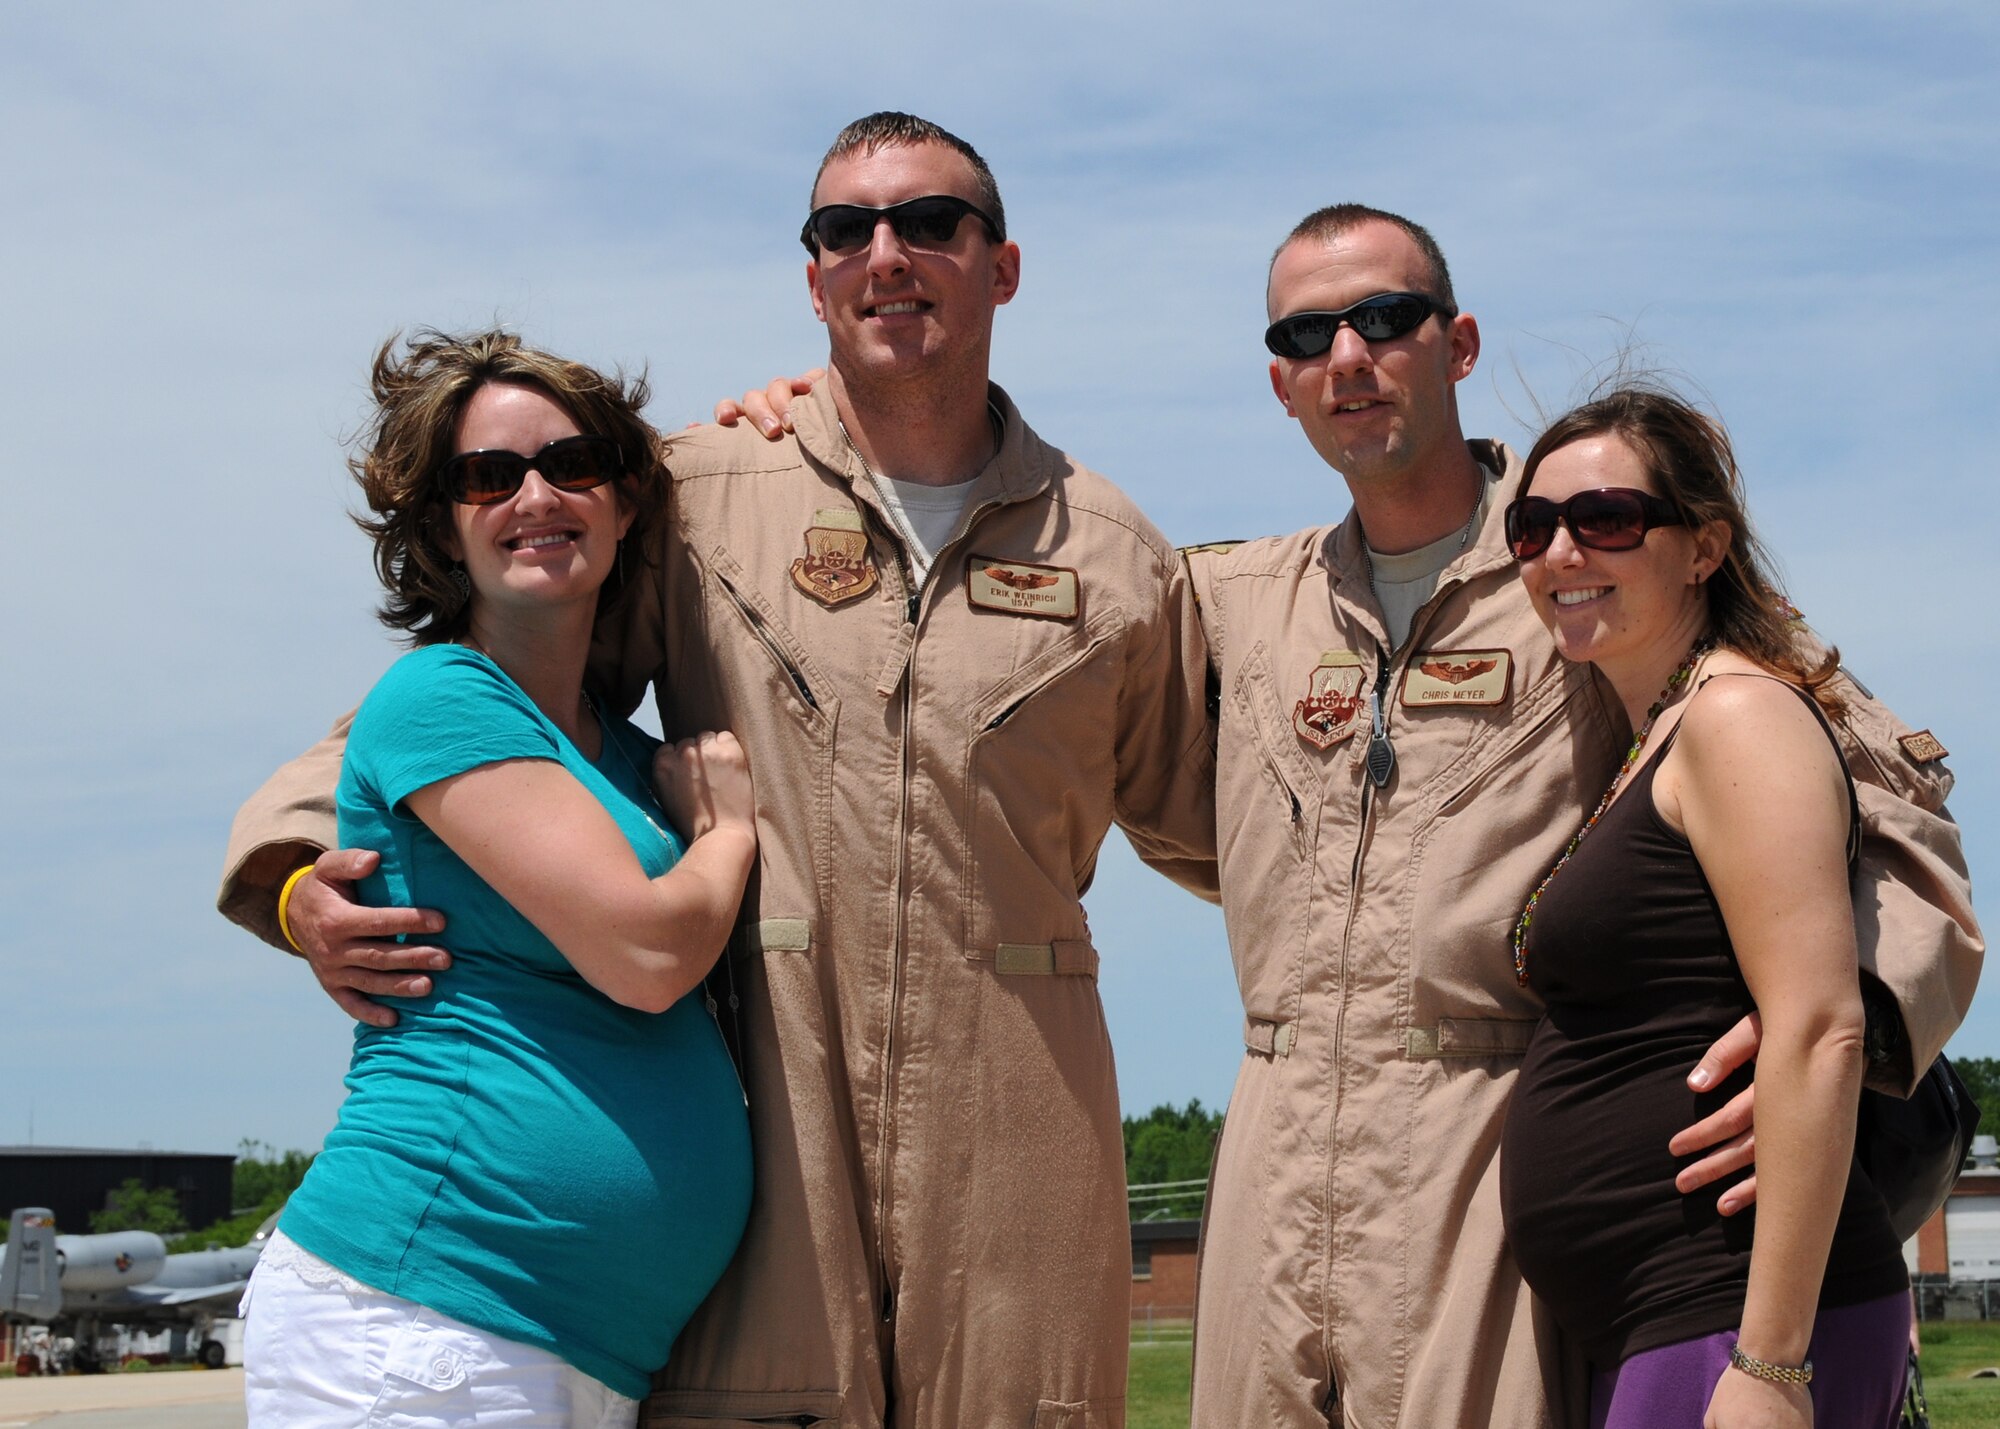 U.S. Air Force Captains Chris Myers and Erik Weinrich , C-130J pilots  with the Maryland Air National Guard, hug their wives, Katie and Holly, on the flightline at Warfield Air National Guard Base, Baltimore, Md., May 15, 2010.  Myers  and Weinrich supported forces fighting in Afghanistan through transporting of supplies and cargo.  (U.S. Air Force photo by Staff Sgt. Benjamin Hughes/Released) 